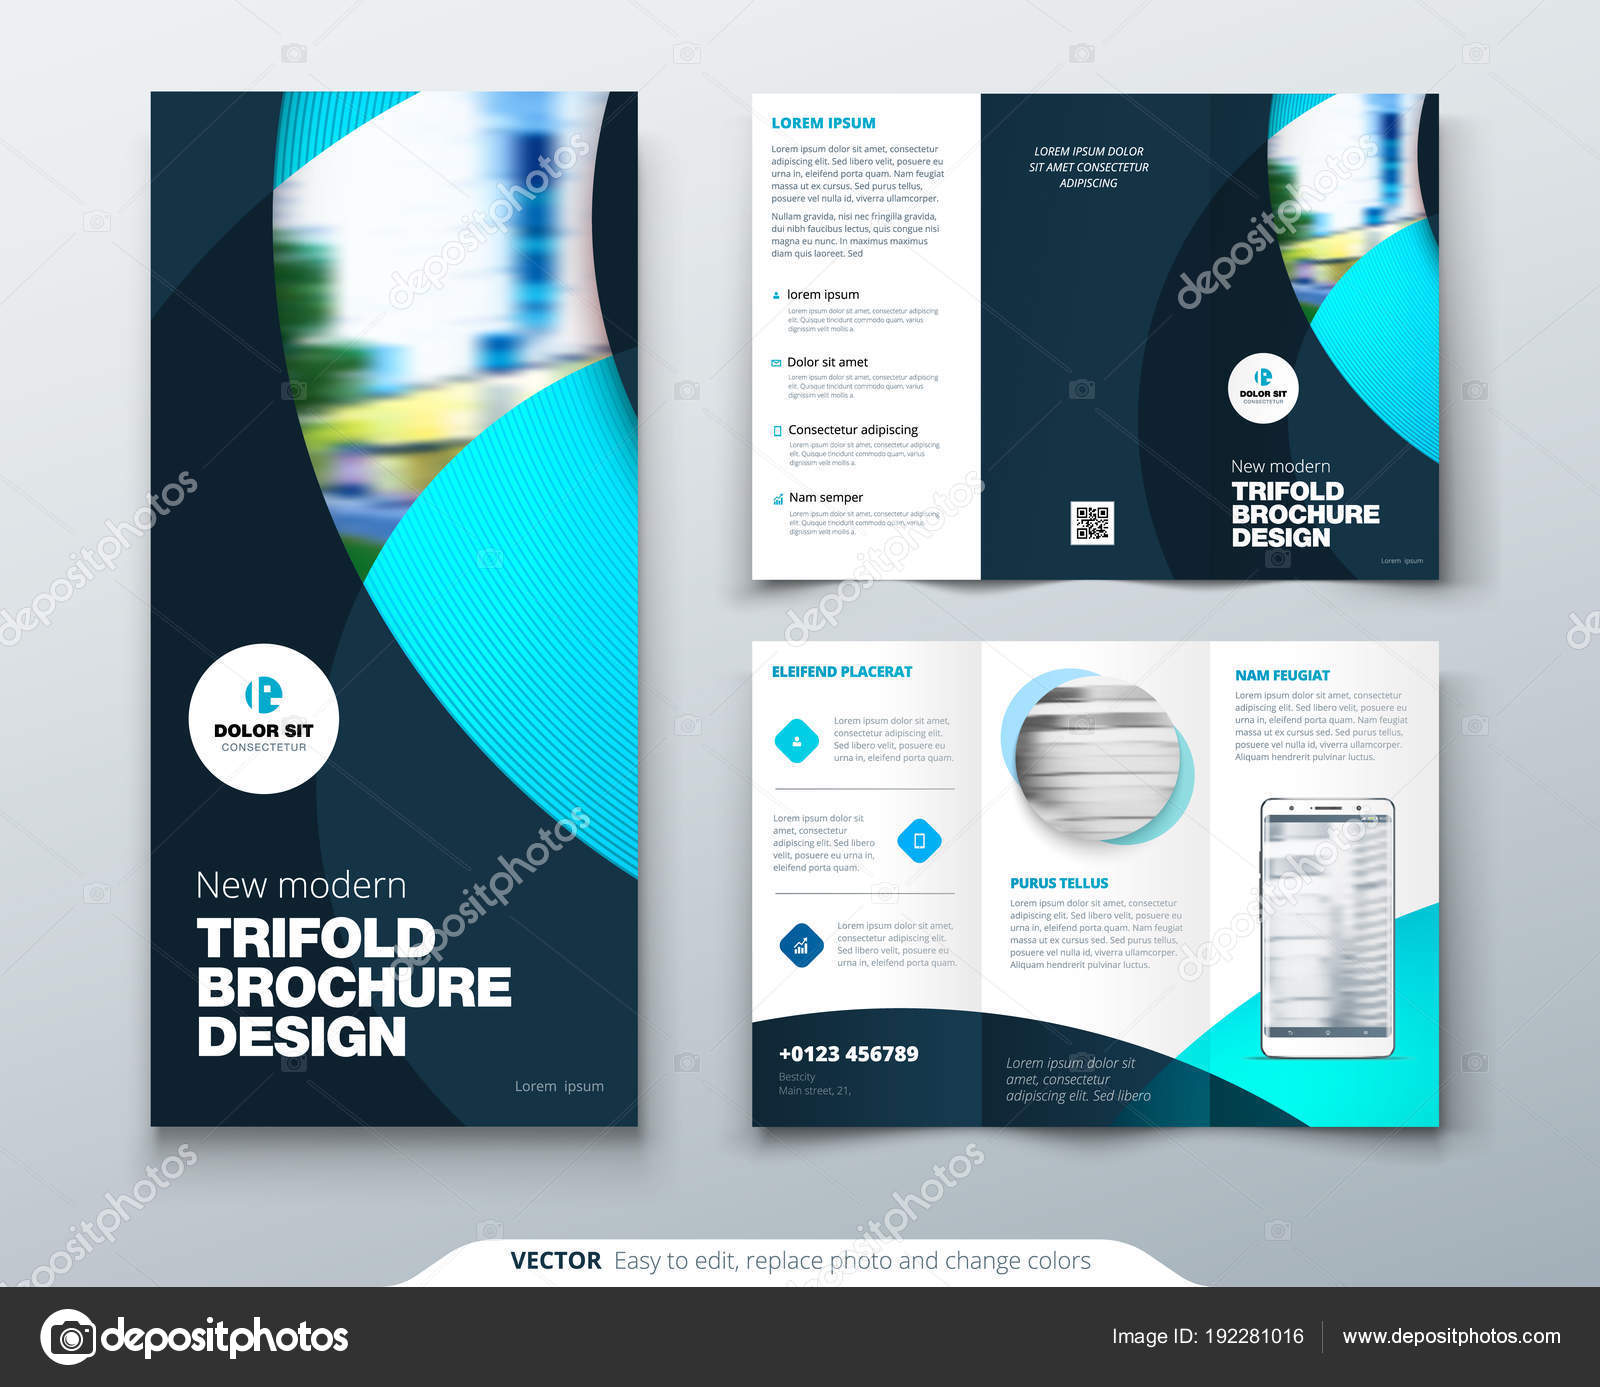 Modern Brochure Design 18 Tri Fold Brochure Design With Circle Corporate Business Template For Tri Fold Flyer Layout With Modern Photo And Abstract Circle Background Creative Concept Folded Flyer Or Brochure